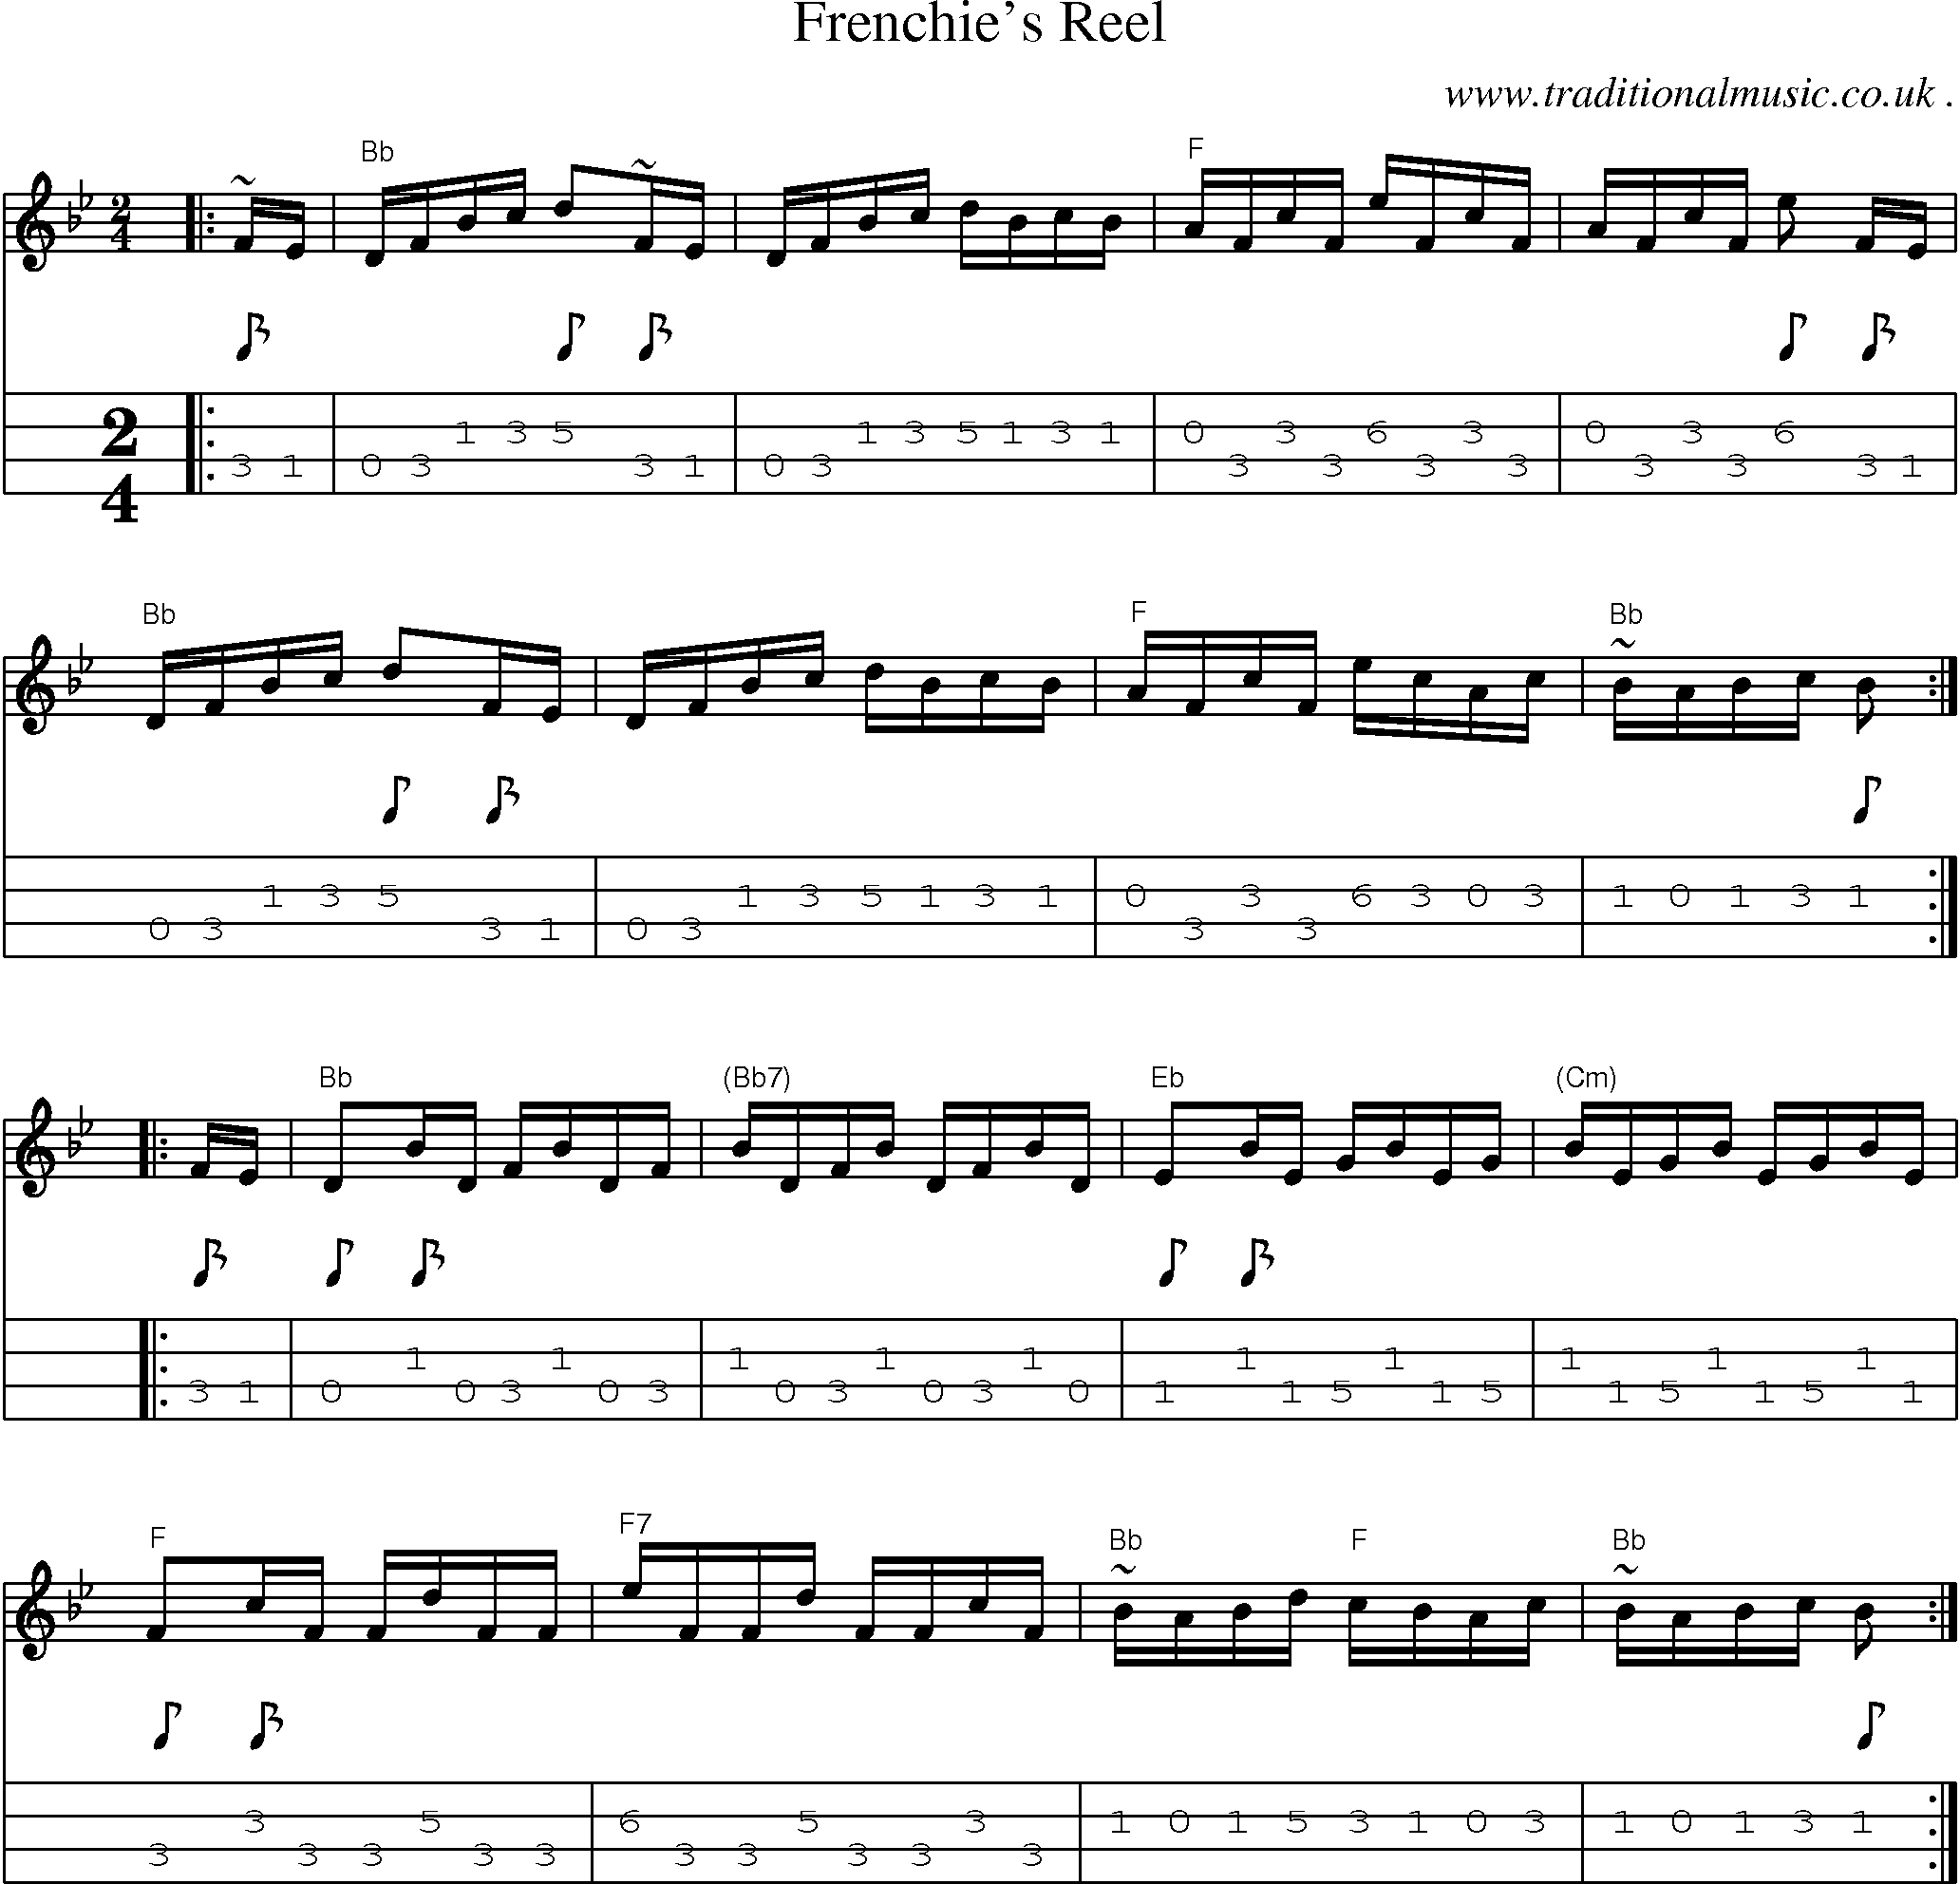 Music Score and Guitar Tabs for Frenchies Reel